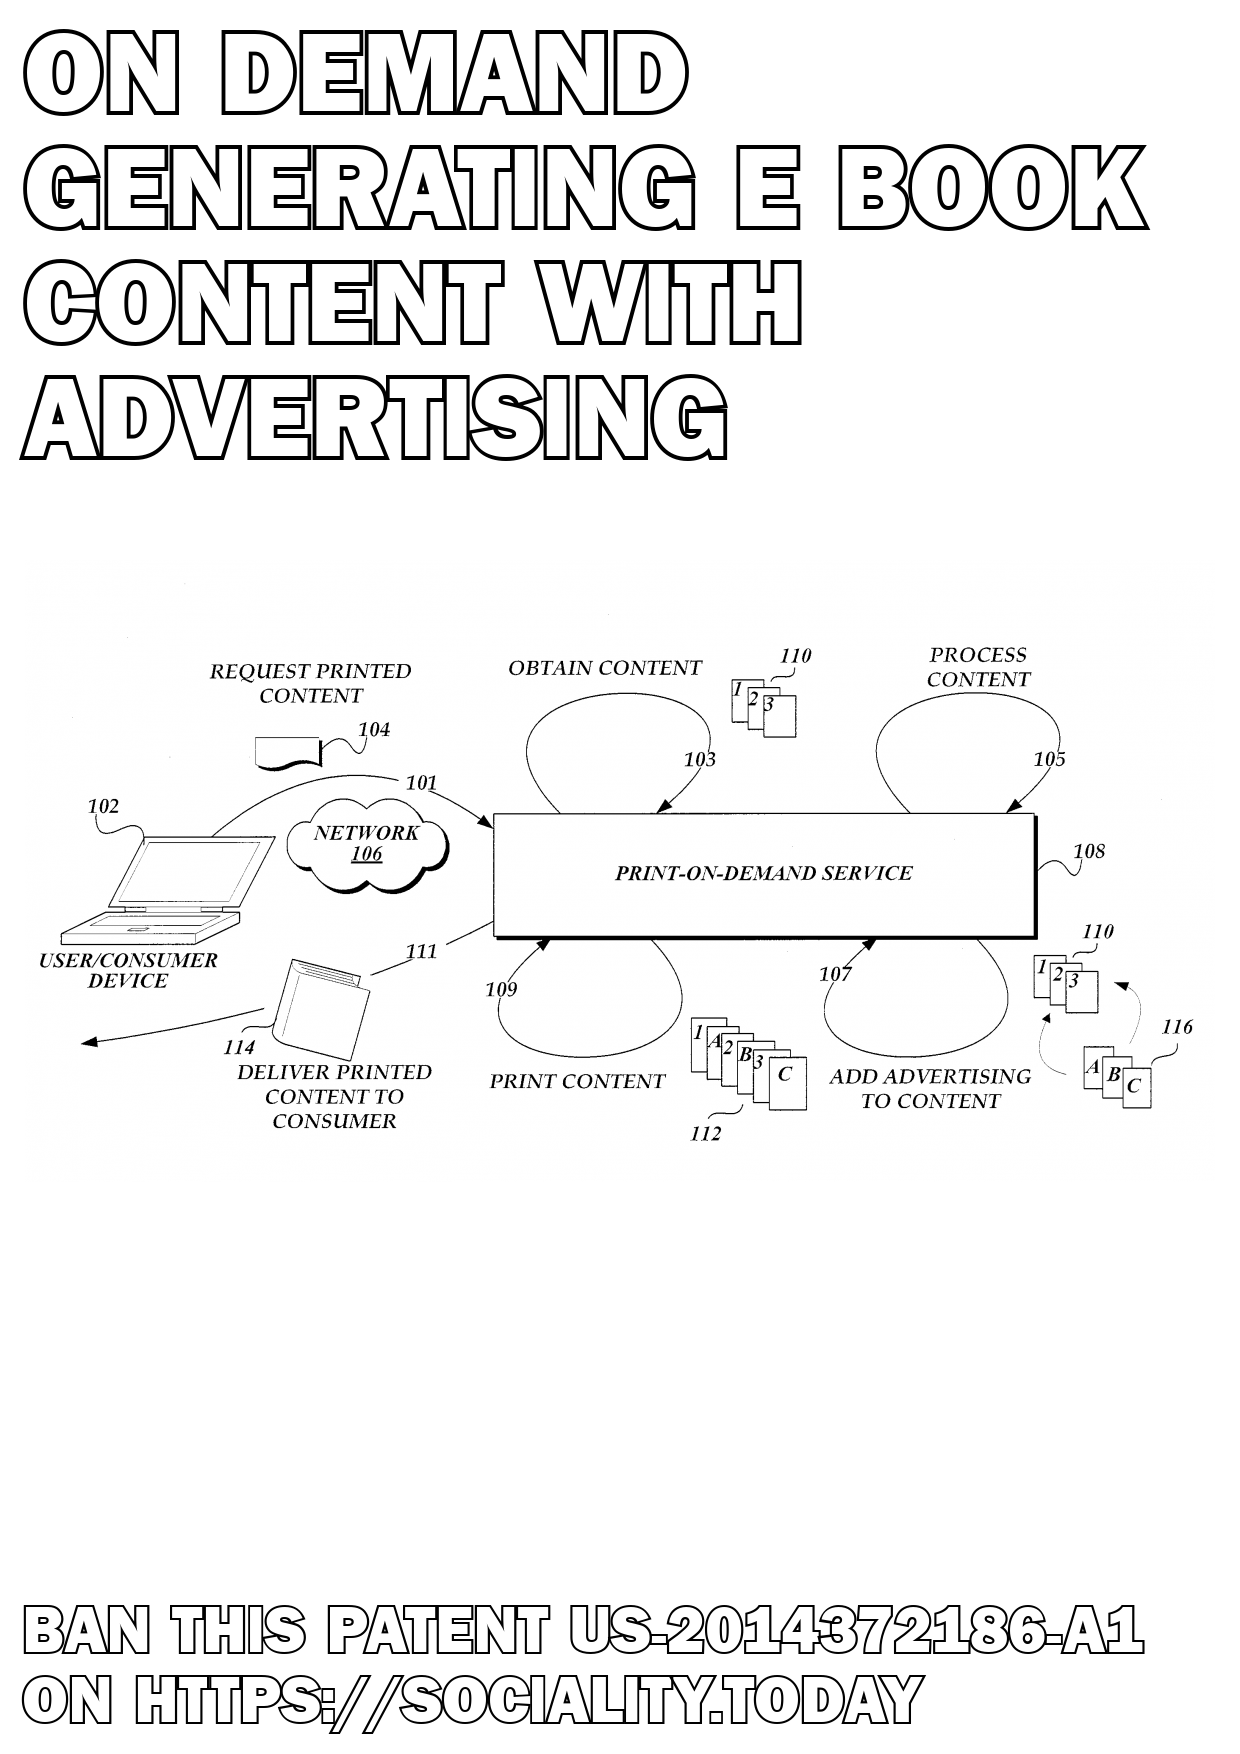 On-Demand Generating E-Book Content with Advertising  - US-2014372186-A1